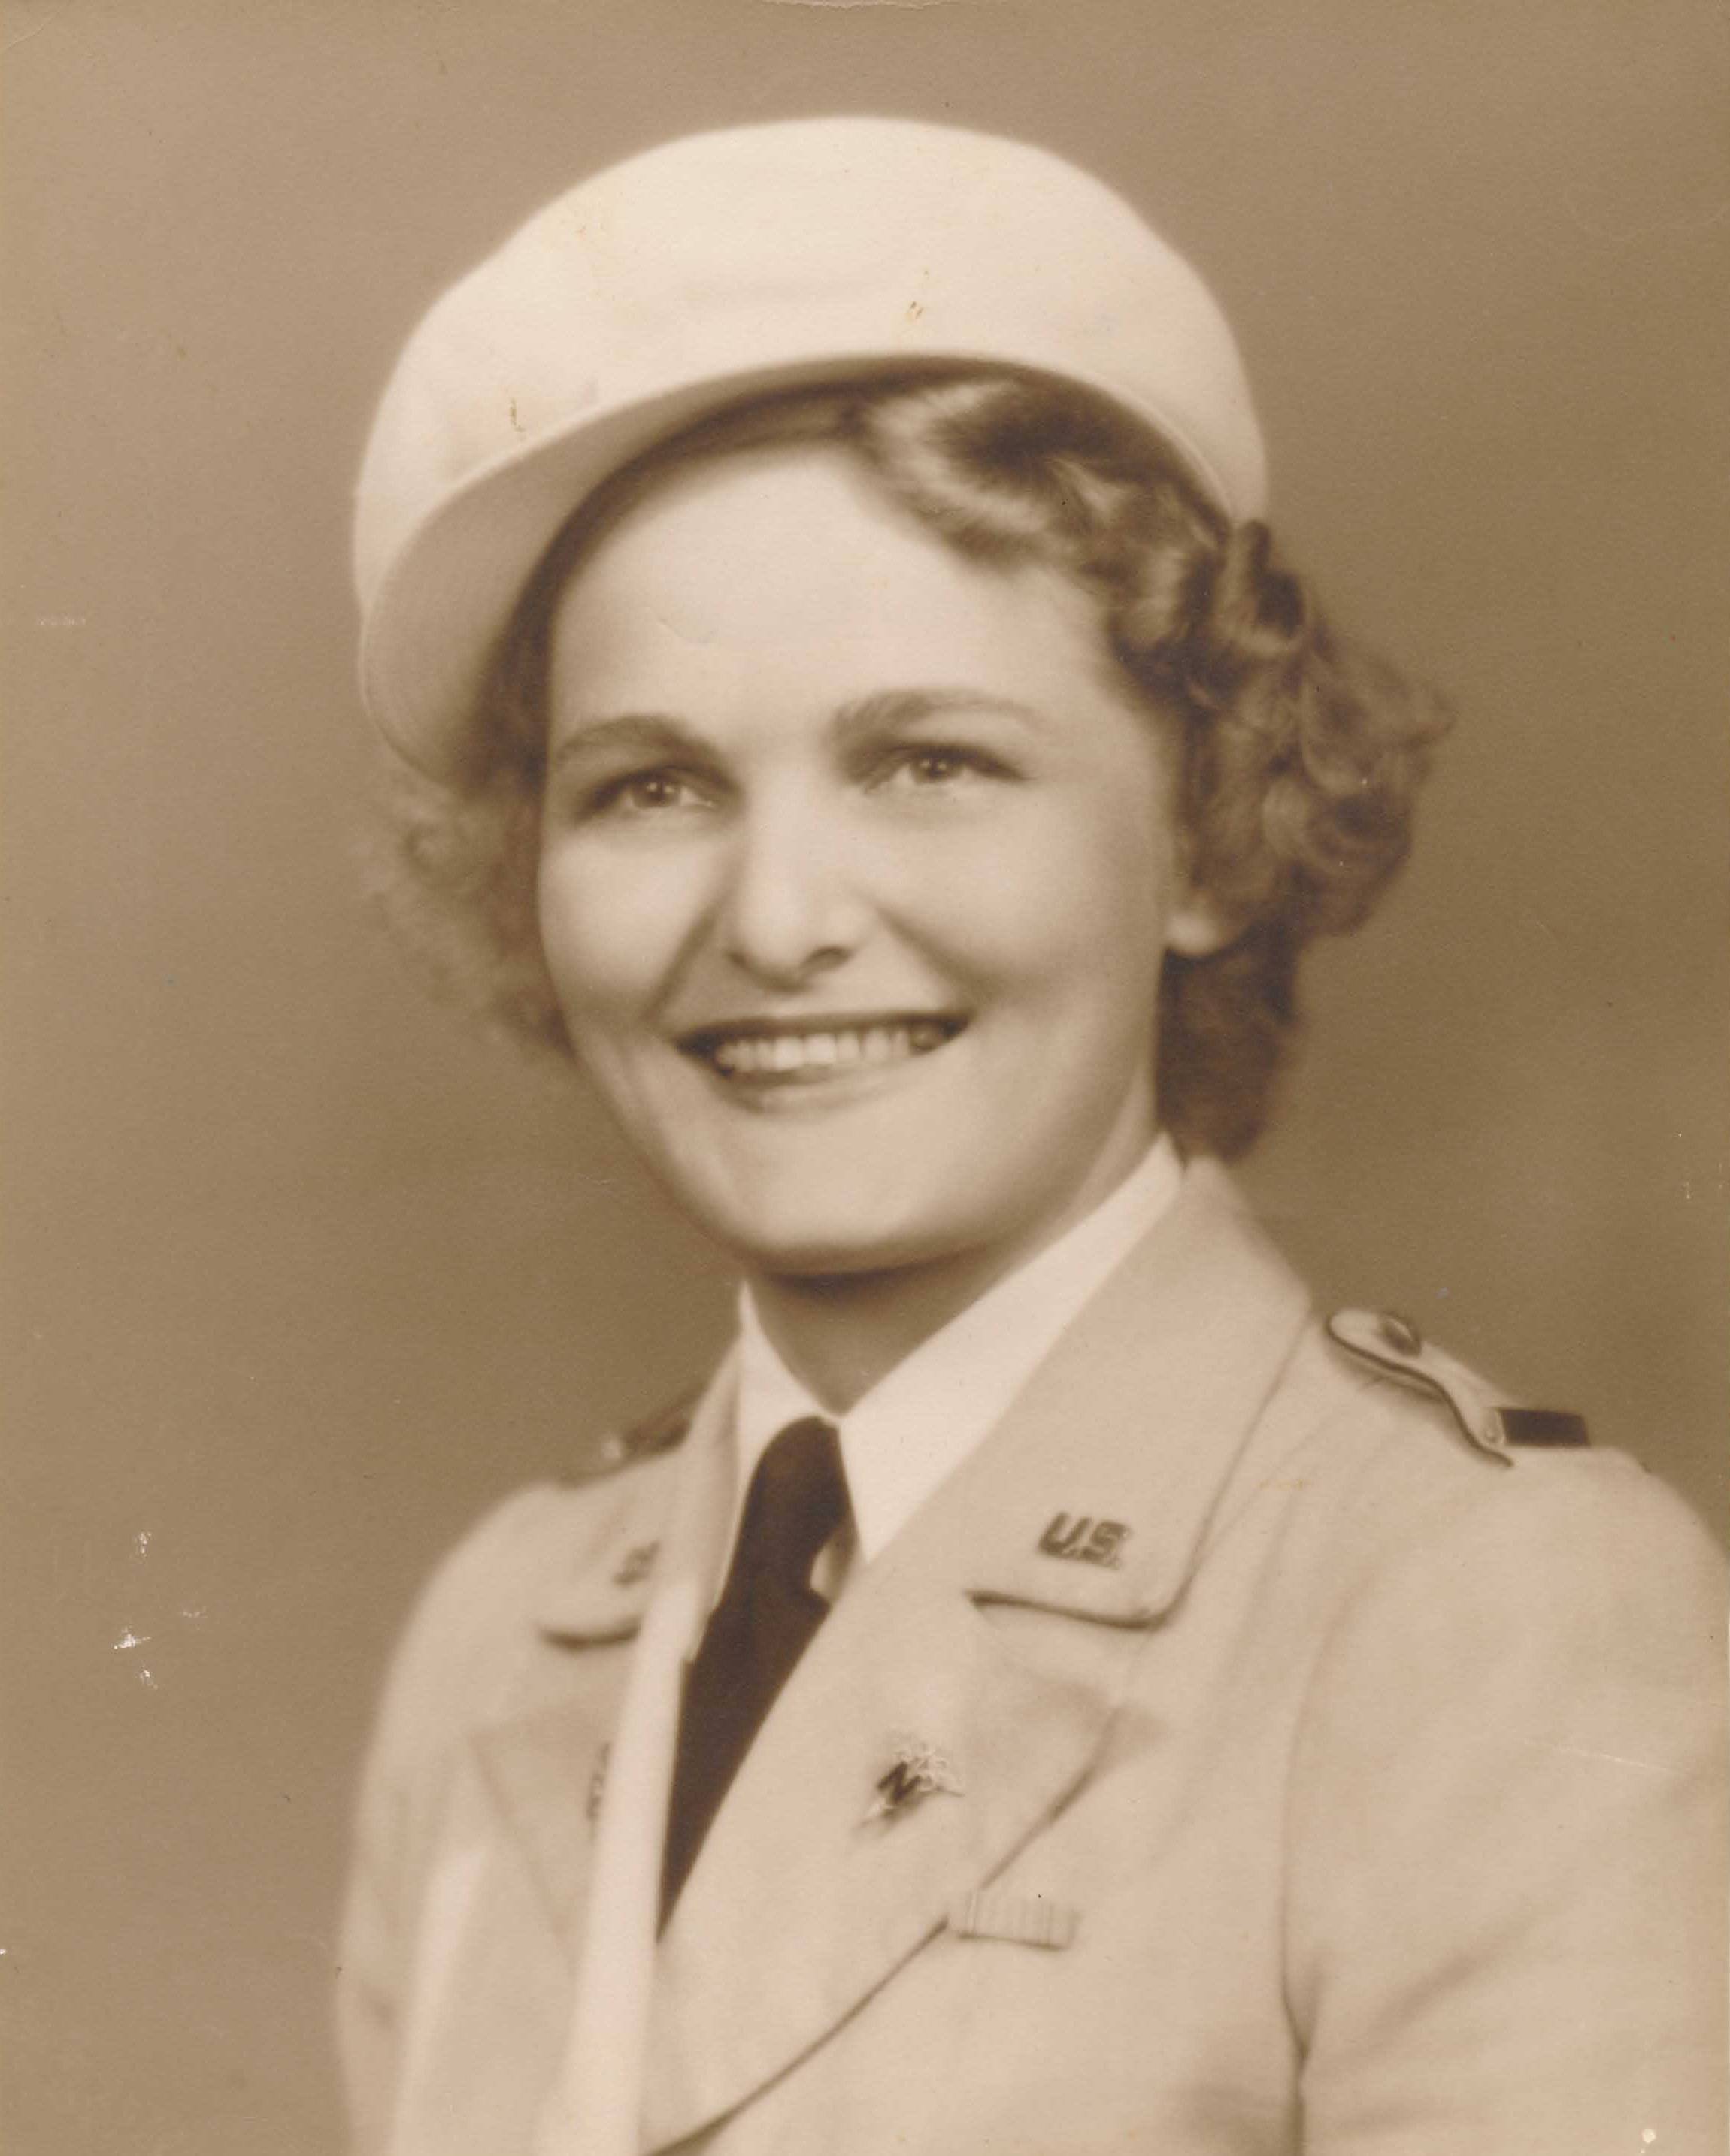 Army nurse Earlyne R. Sheets poses for her Army Nurse Corps headshot in 1941